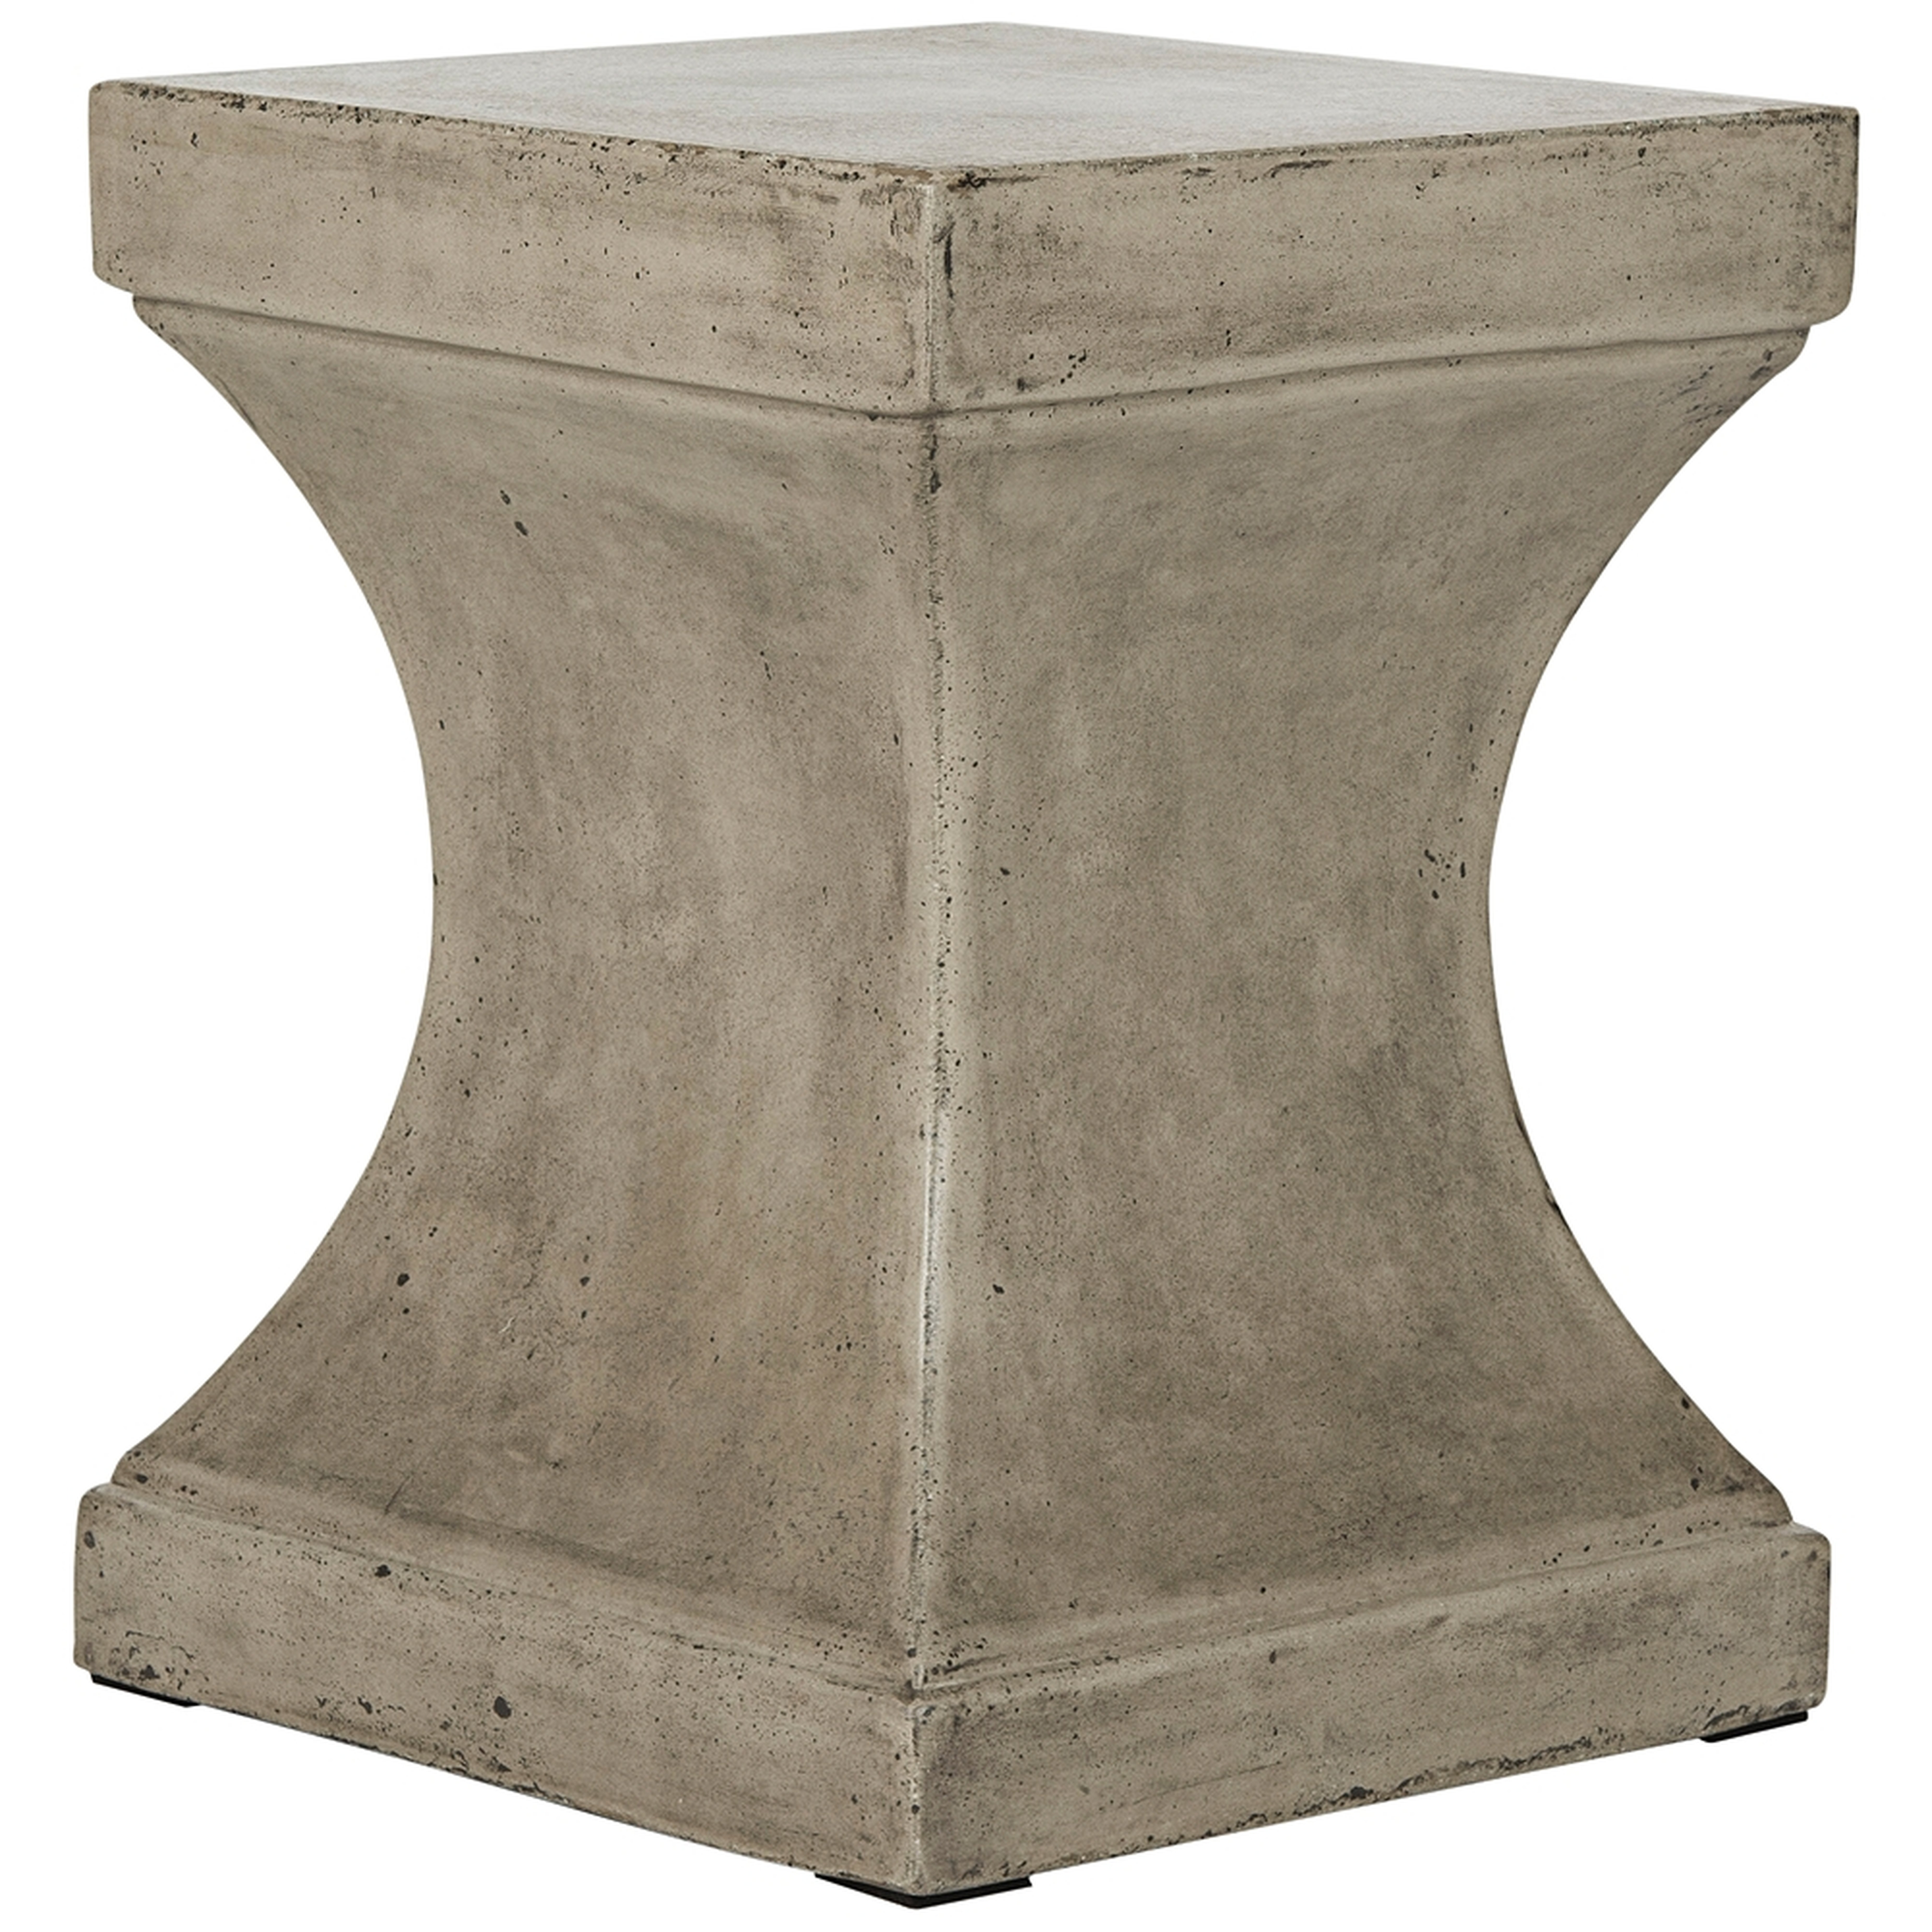 Curby Dark Gray Concrete Indoor-Outdoor Accent Table - Style # 35X56 - Lamps Plus